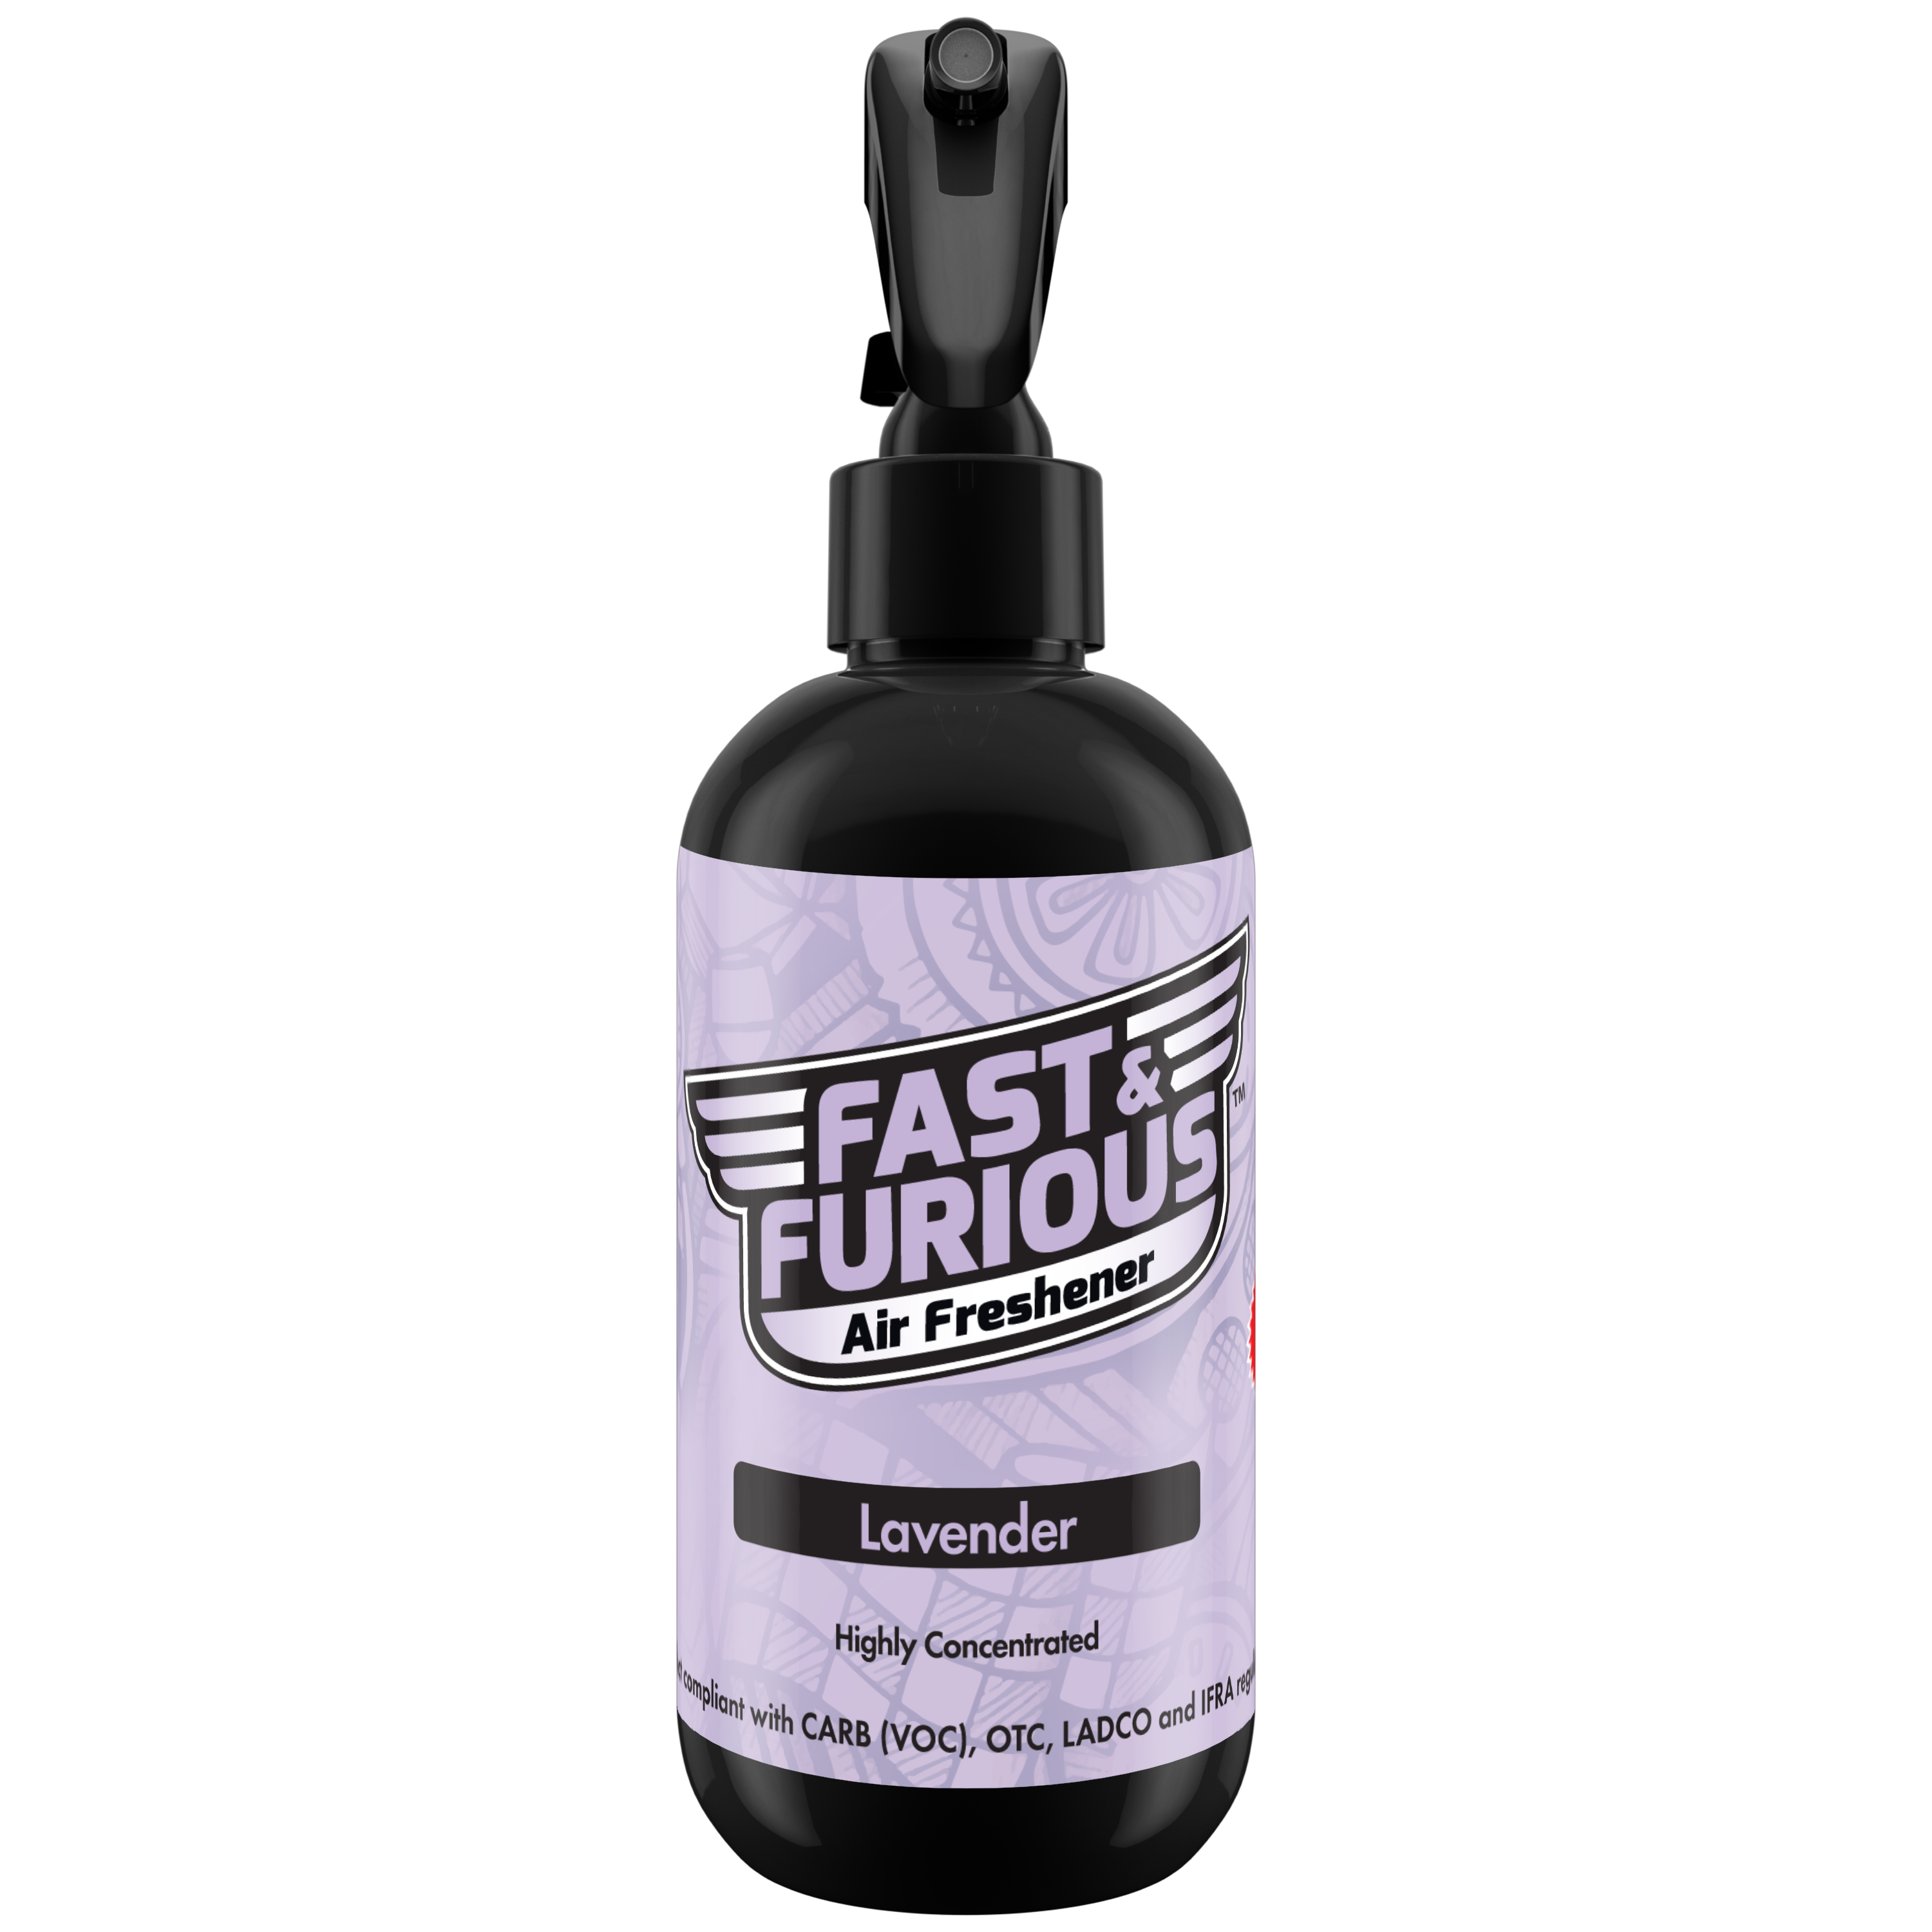 Fast and Furious Air Freshener - Lavender Scent